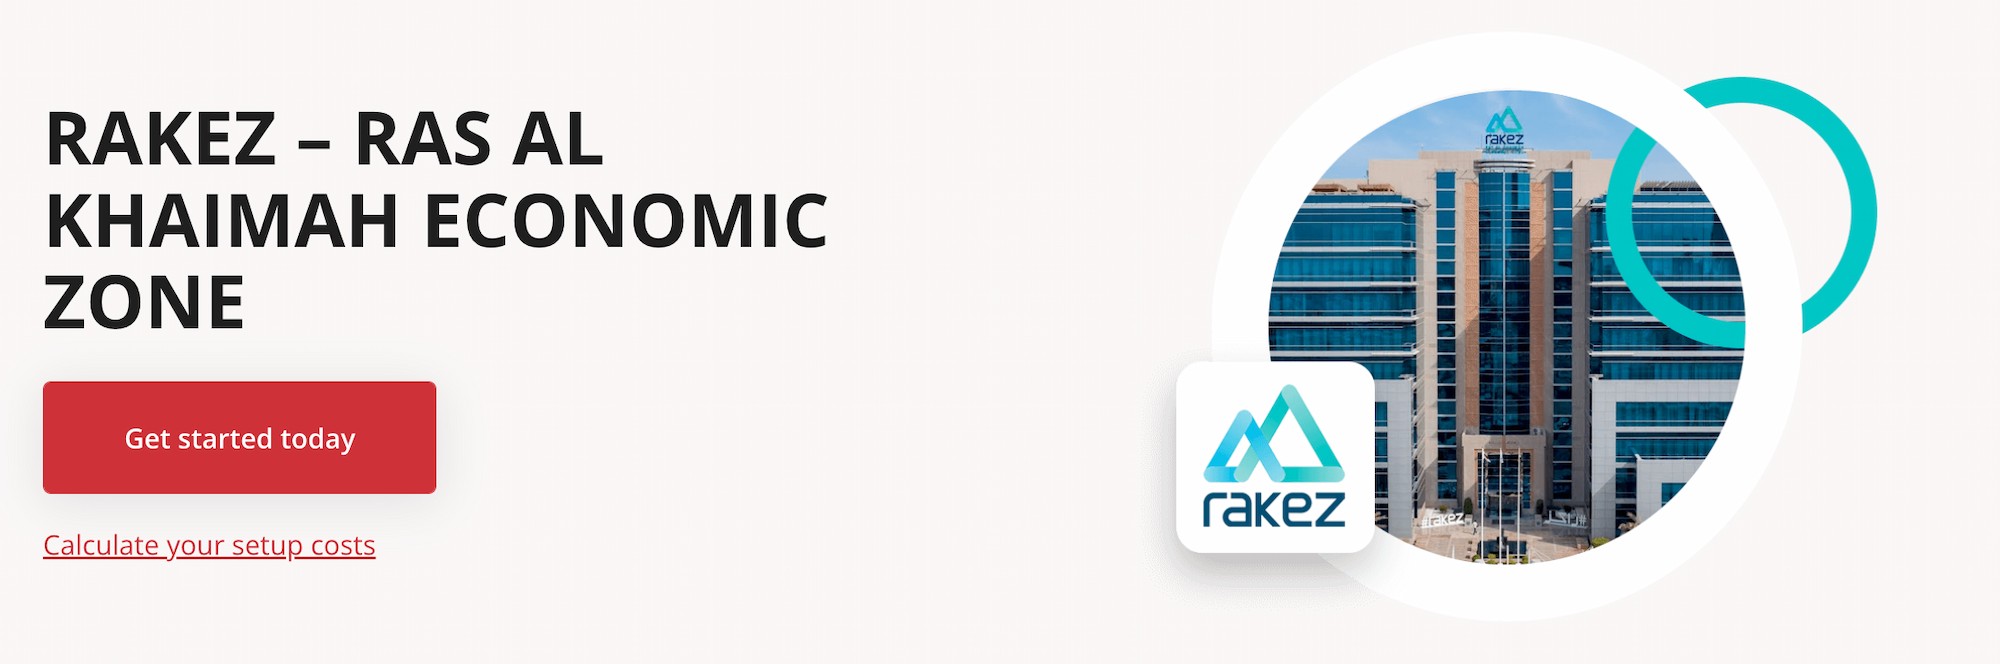 RAKEZ Free Zone, one of the cheapest Free Zones in the UAE.